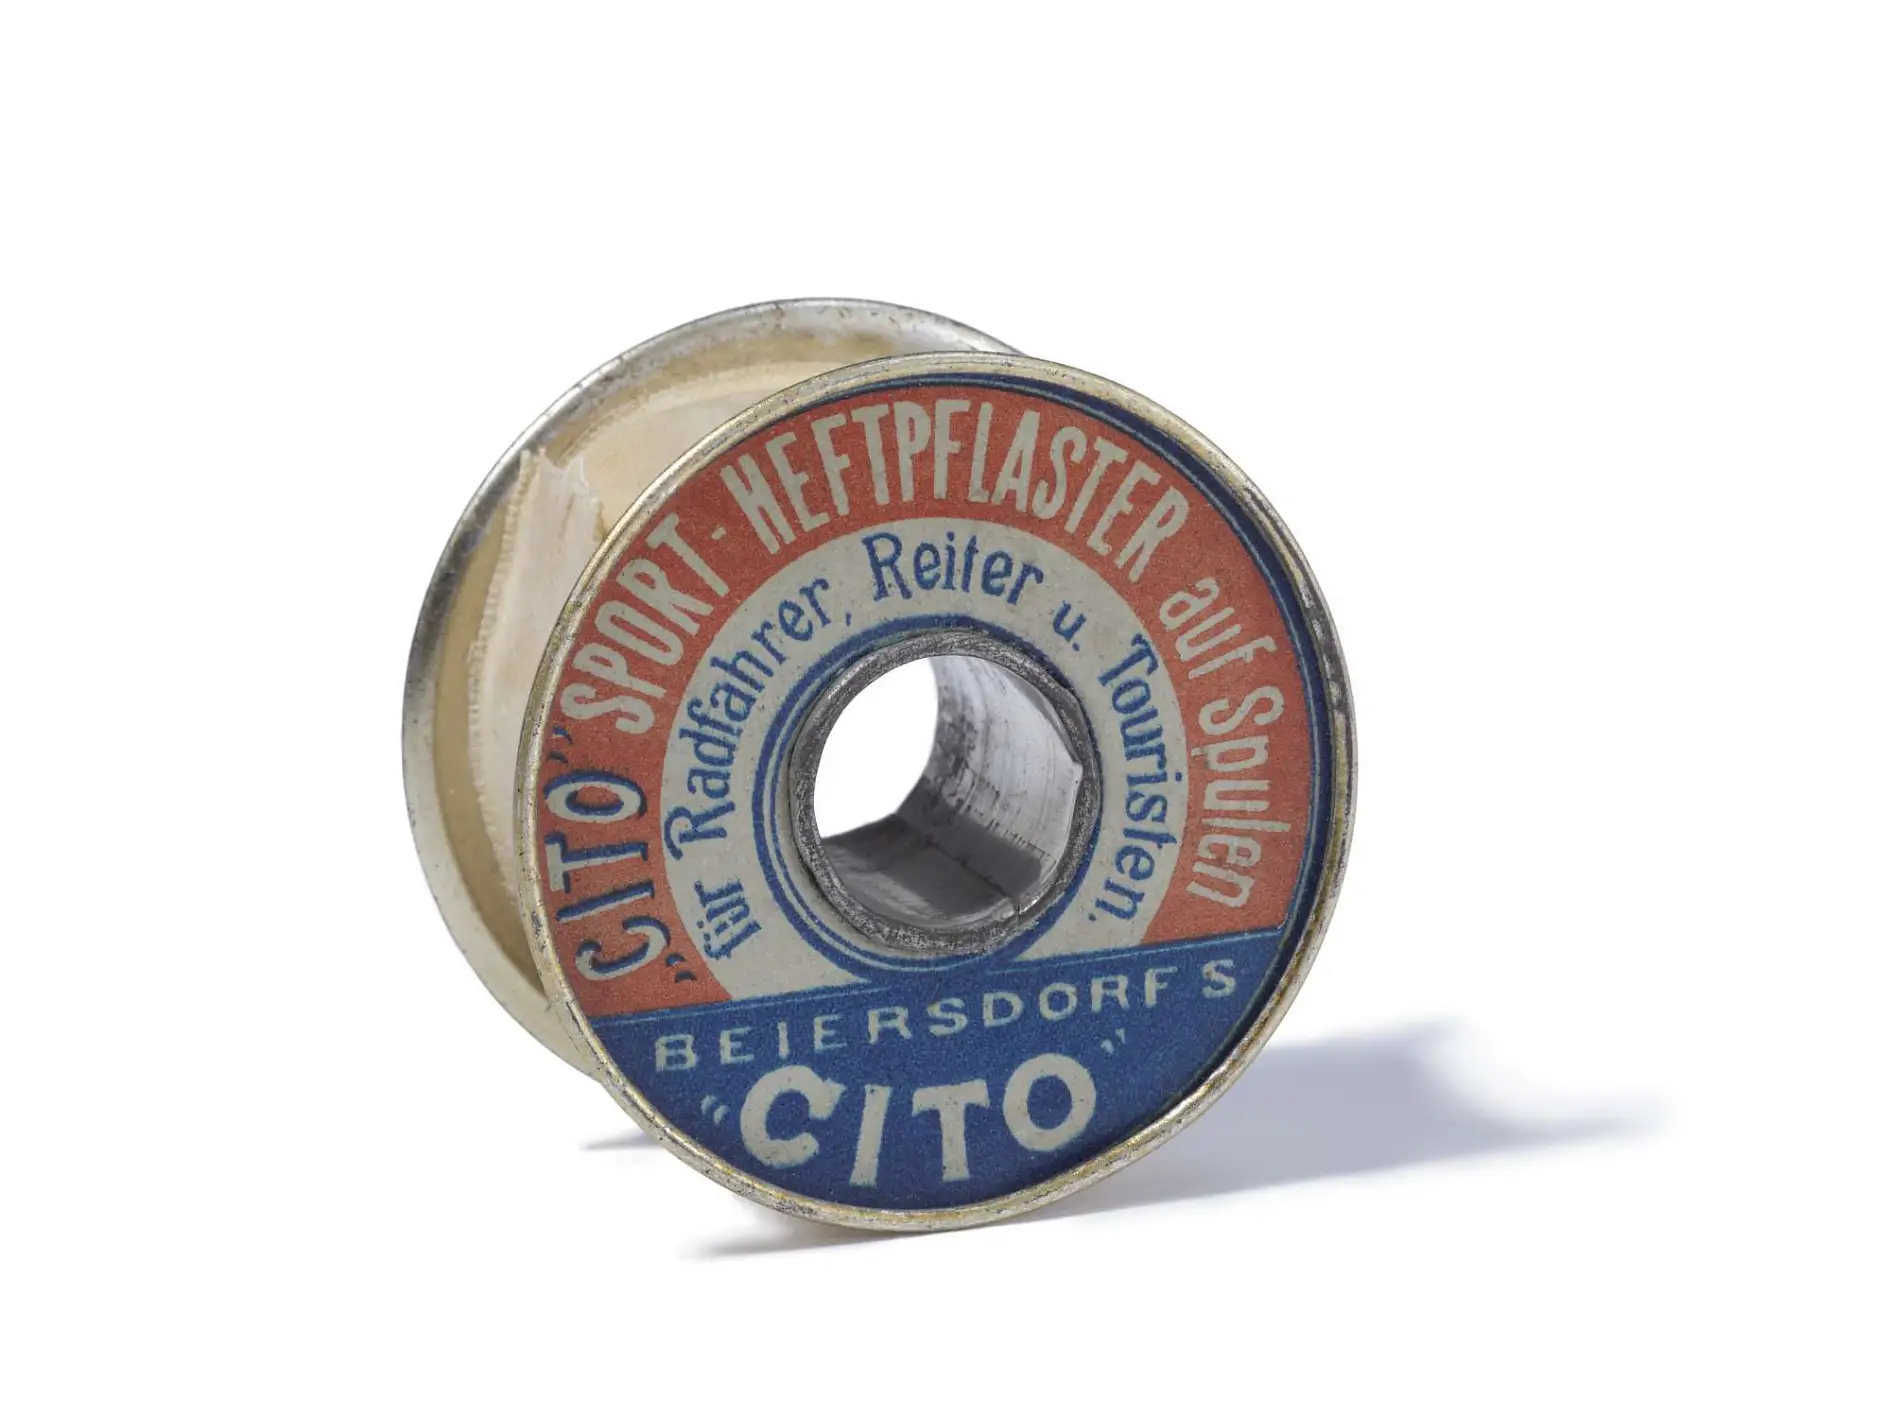 The Cito sports adhesive plaster from 1896 is the world's first technical adhesive tape.